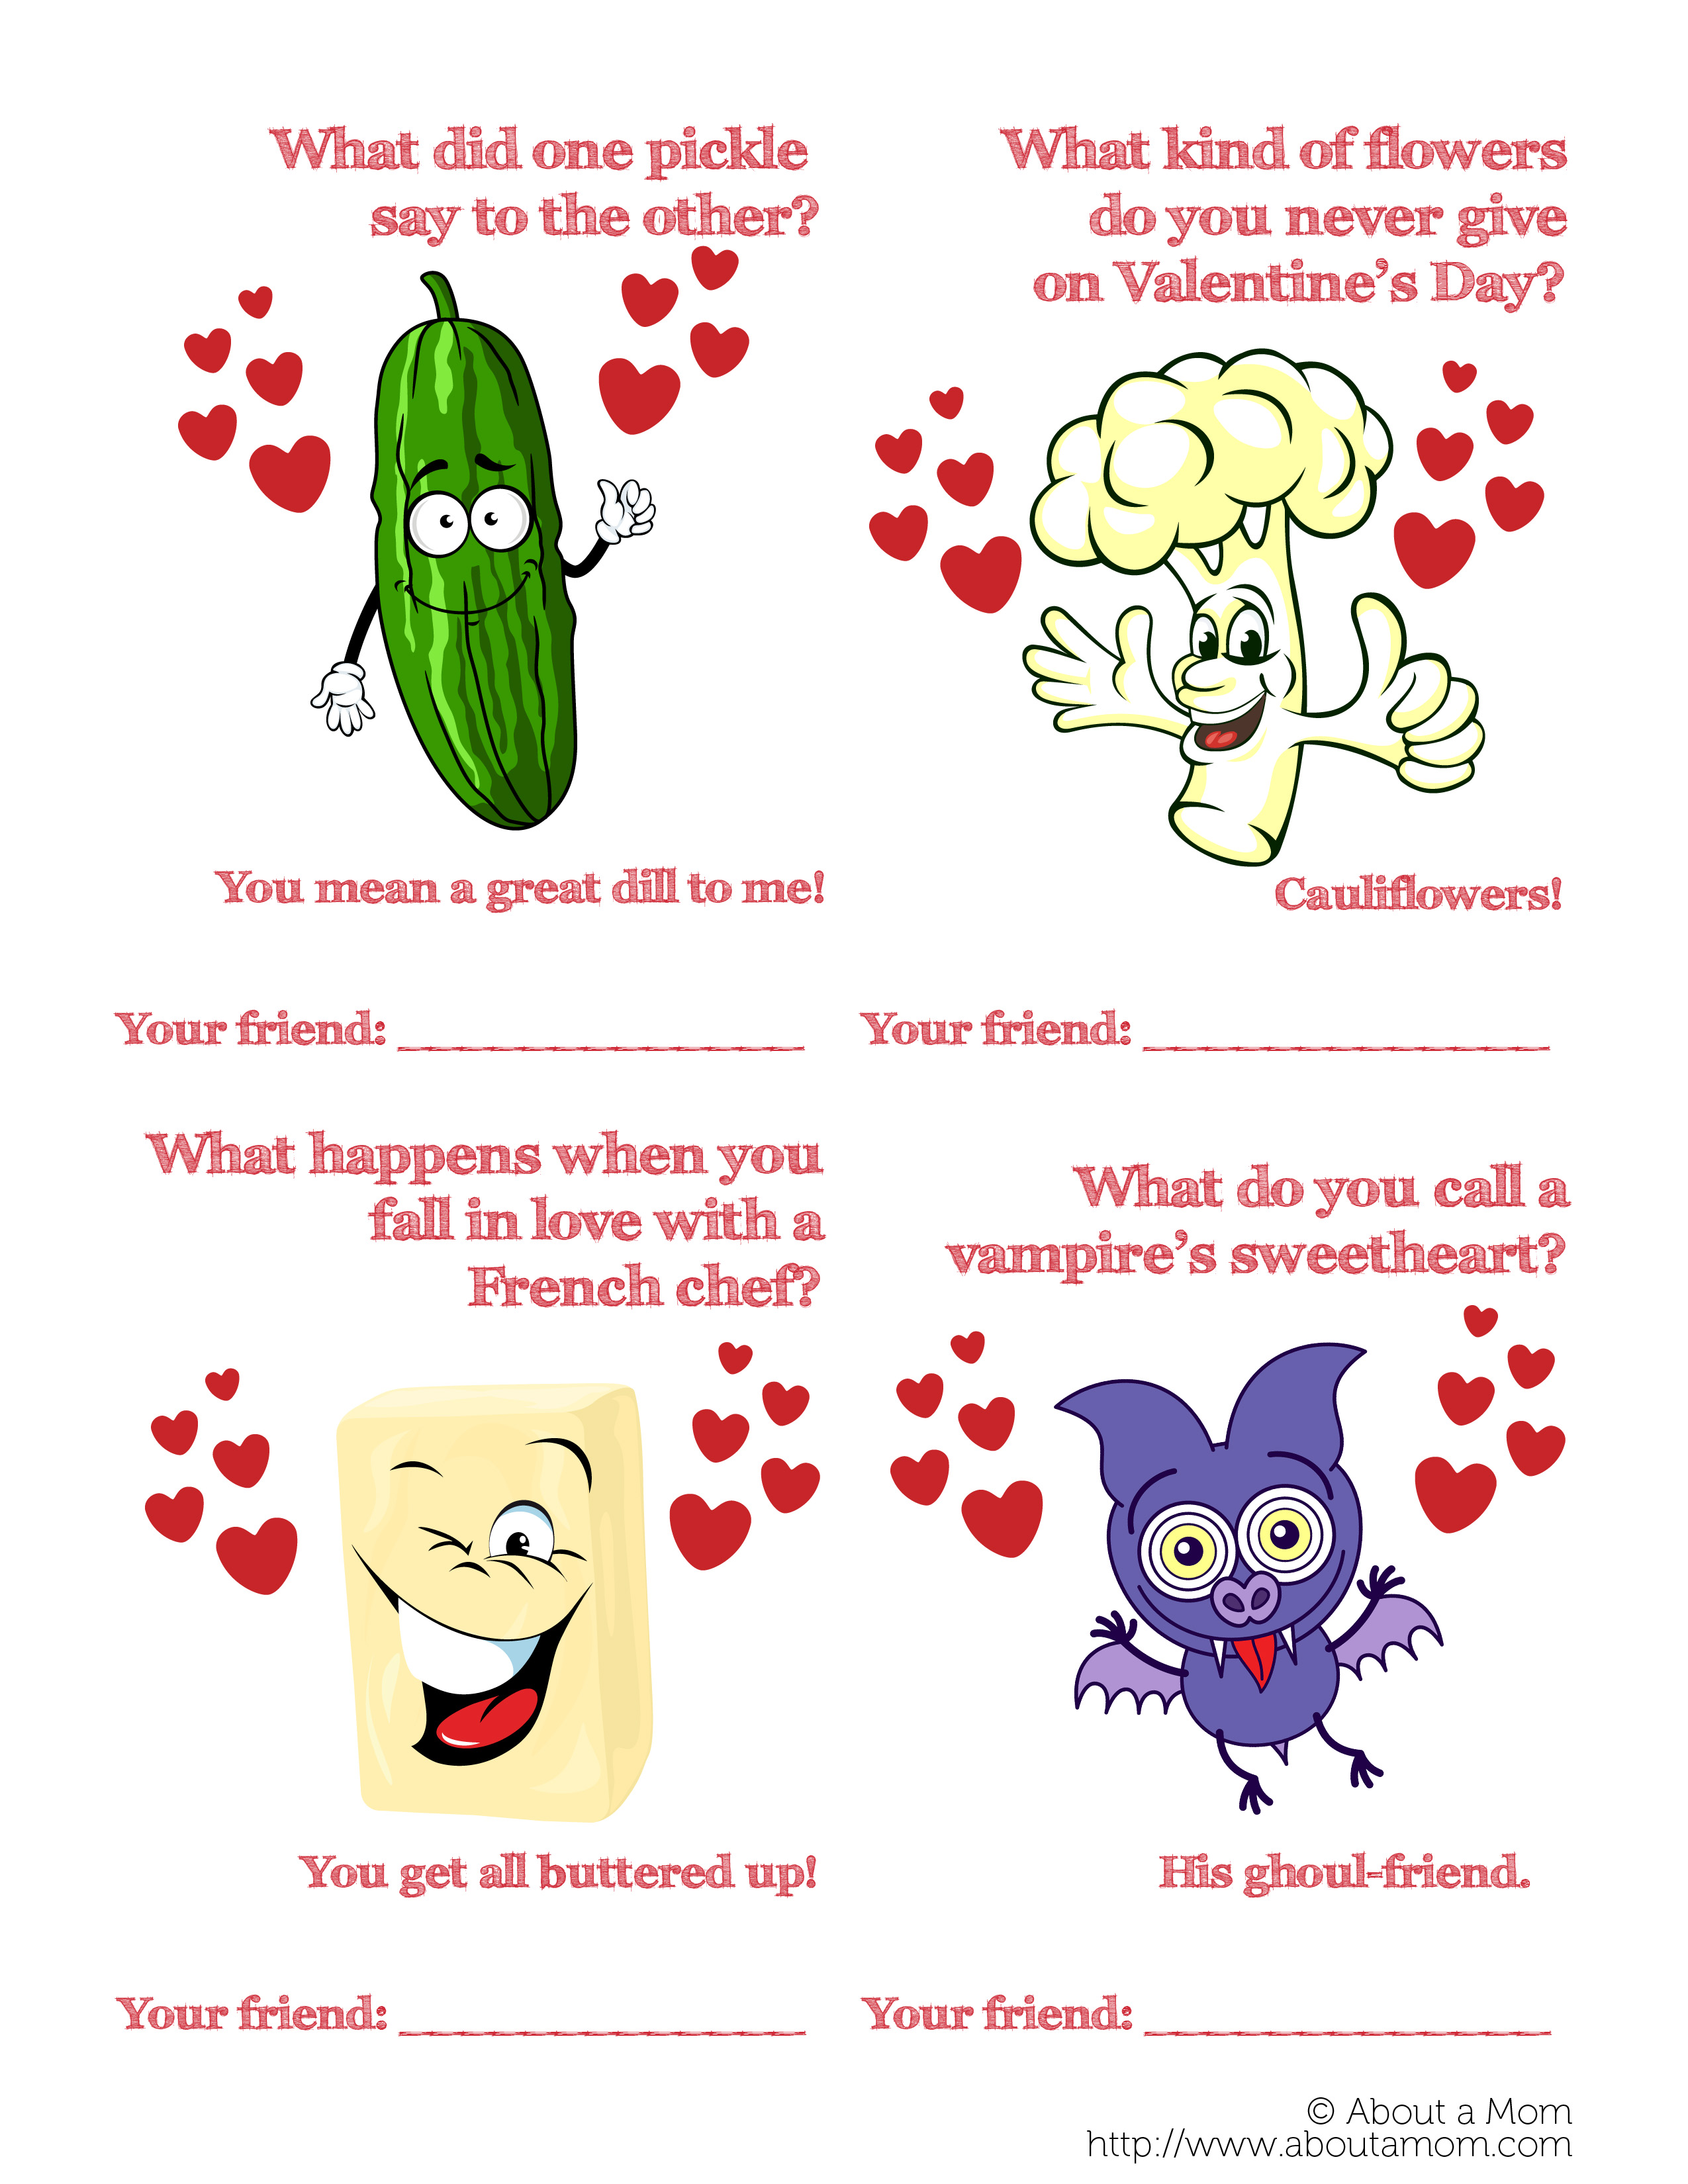 Printable Valentines Cards Free Funny Printable Templates